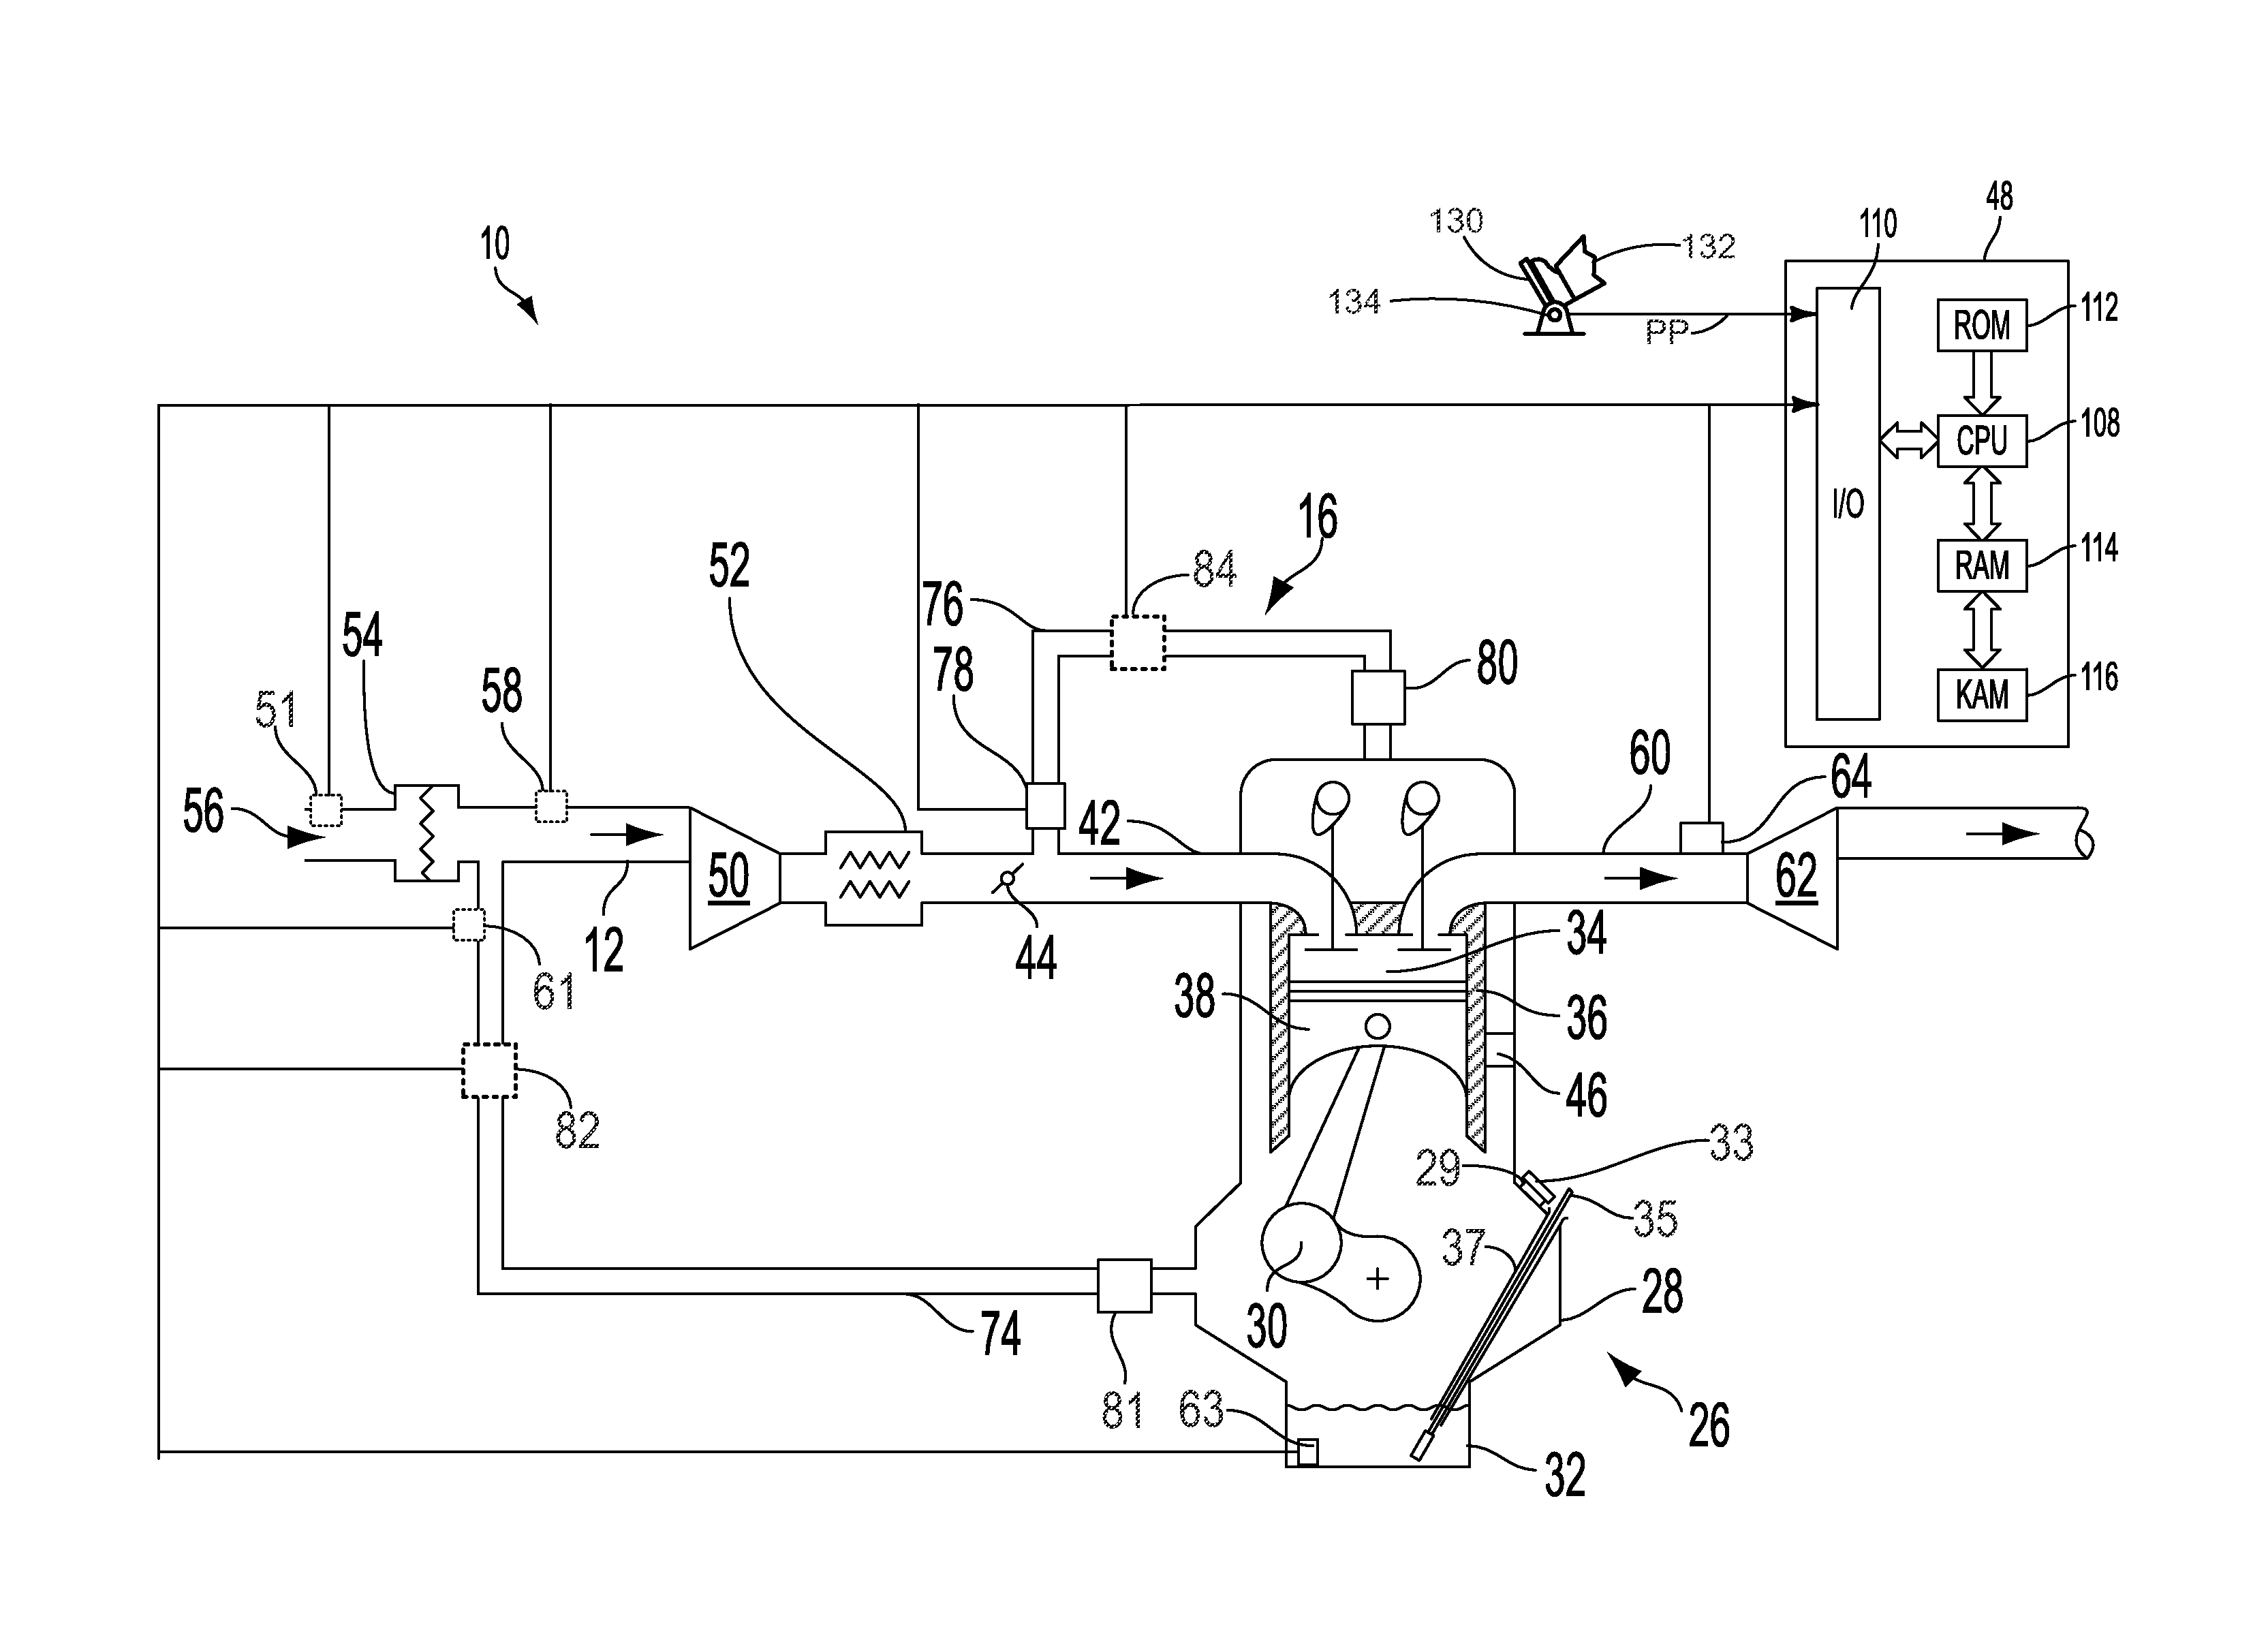 Method for determining crankcase breach and oil level